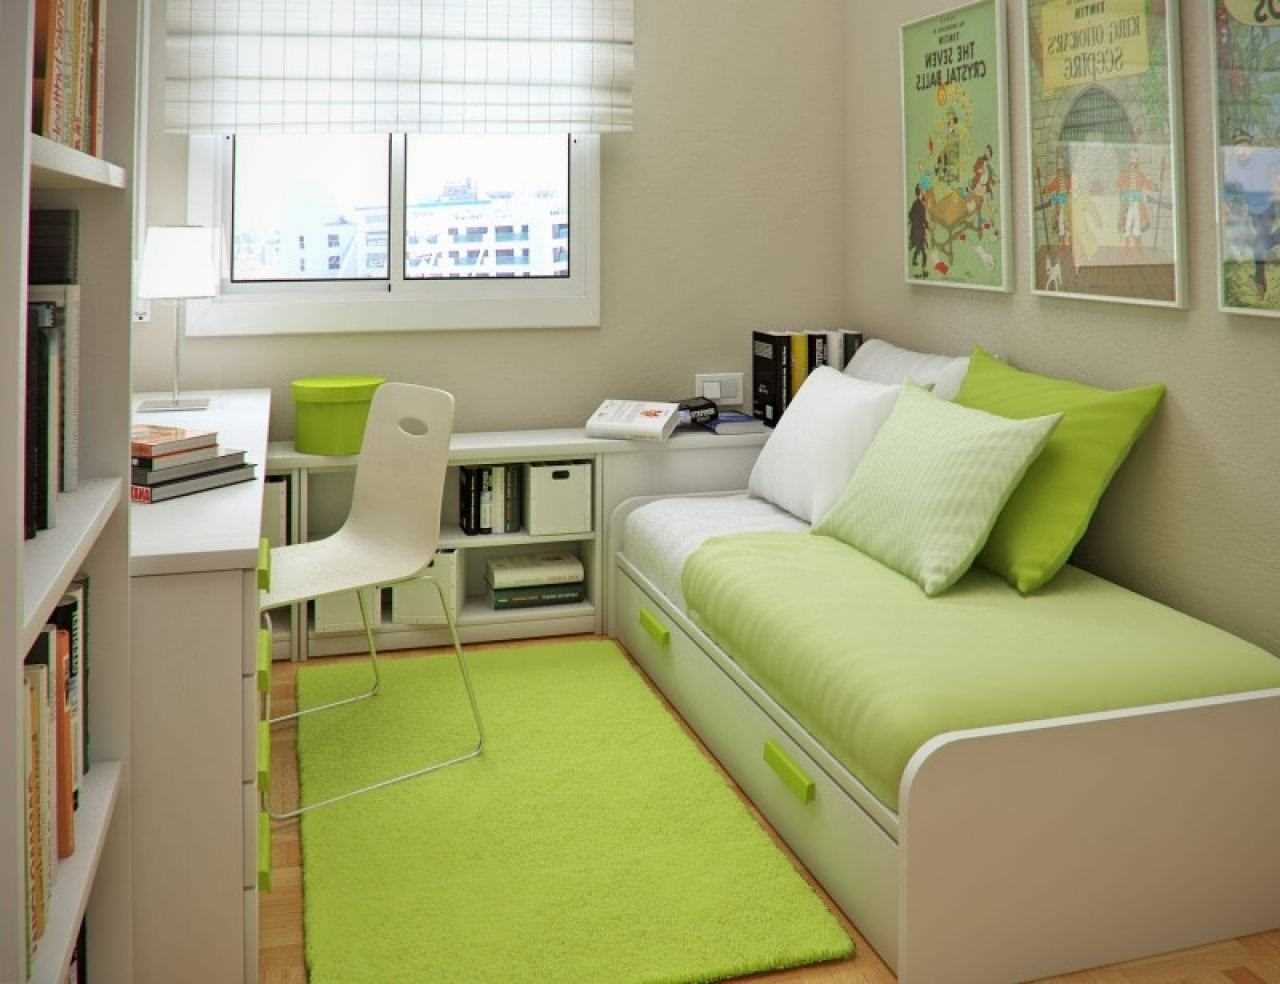 variant of the beautiful style of a small dorm room